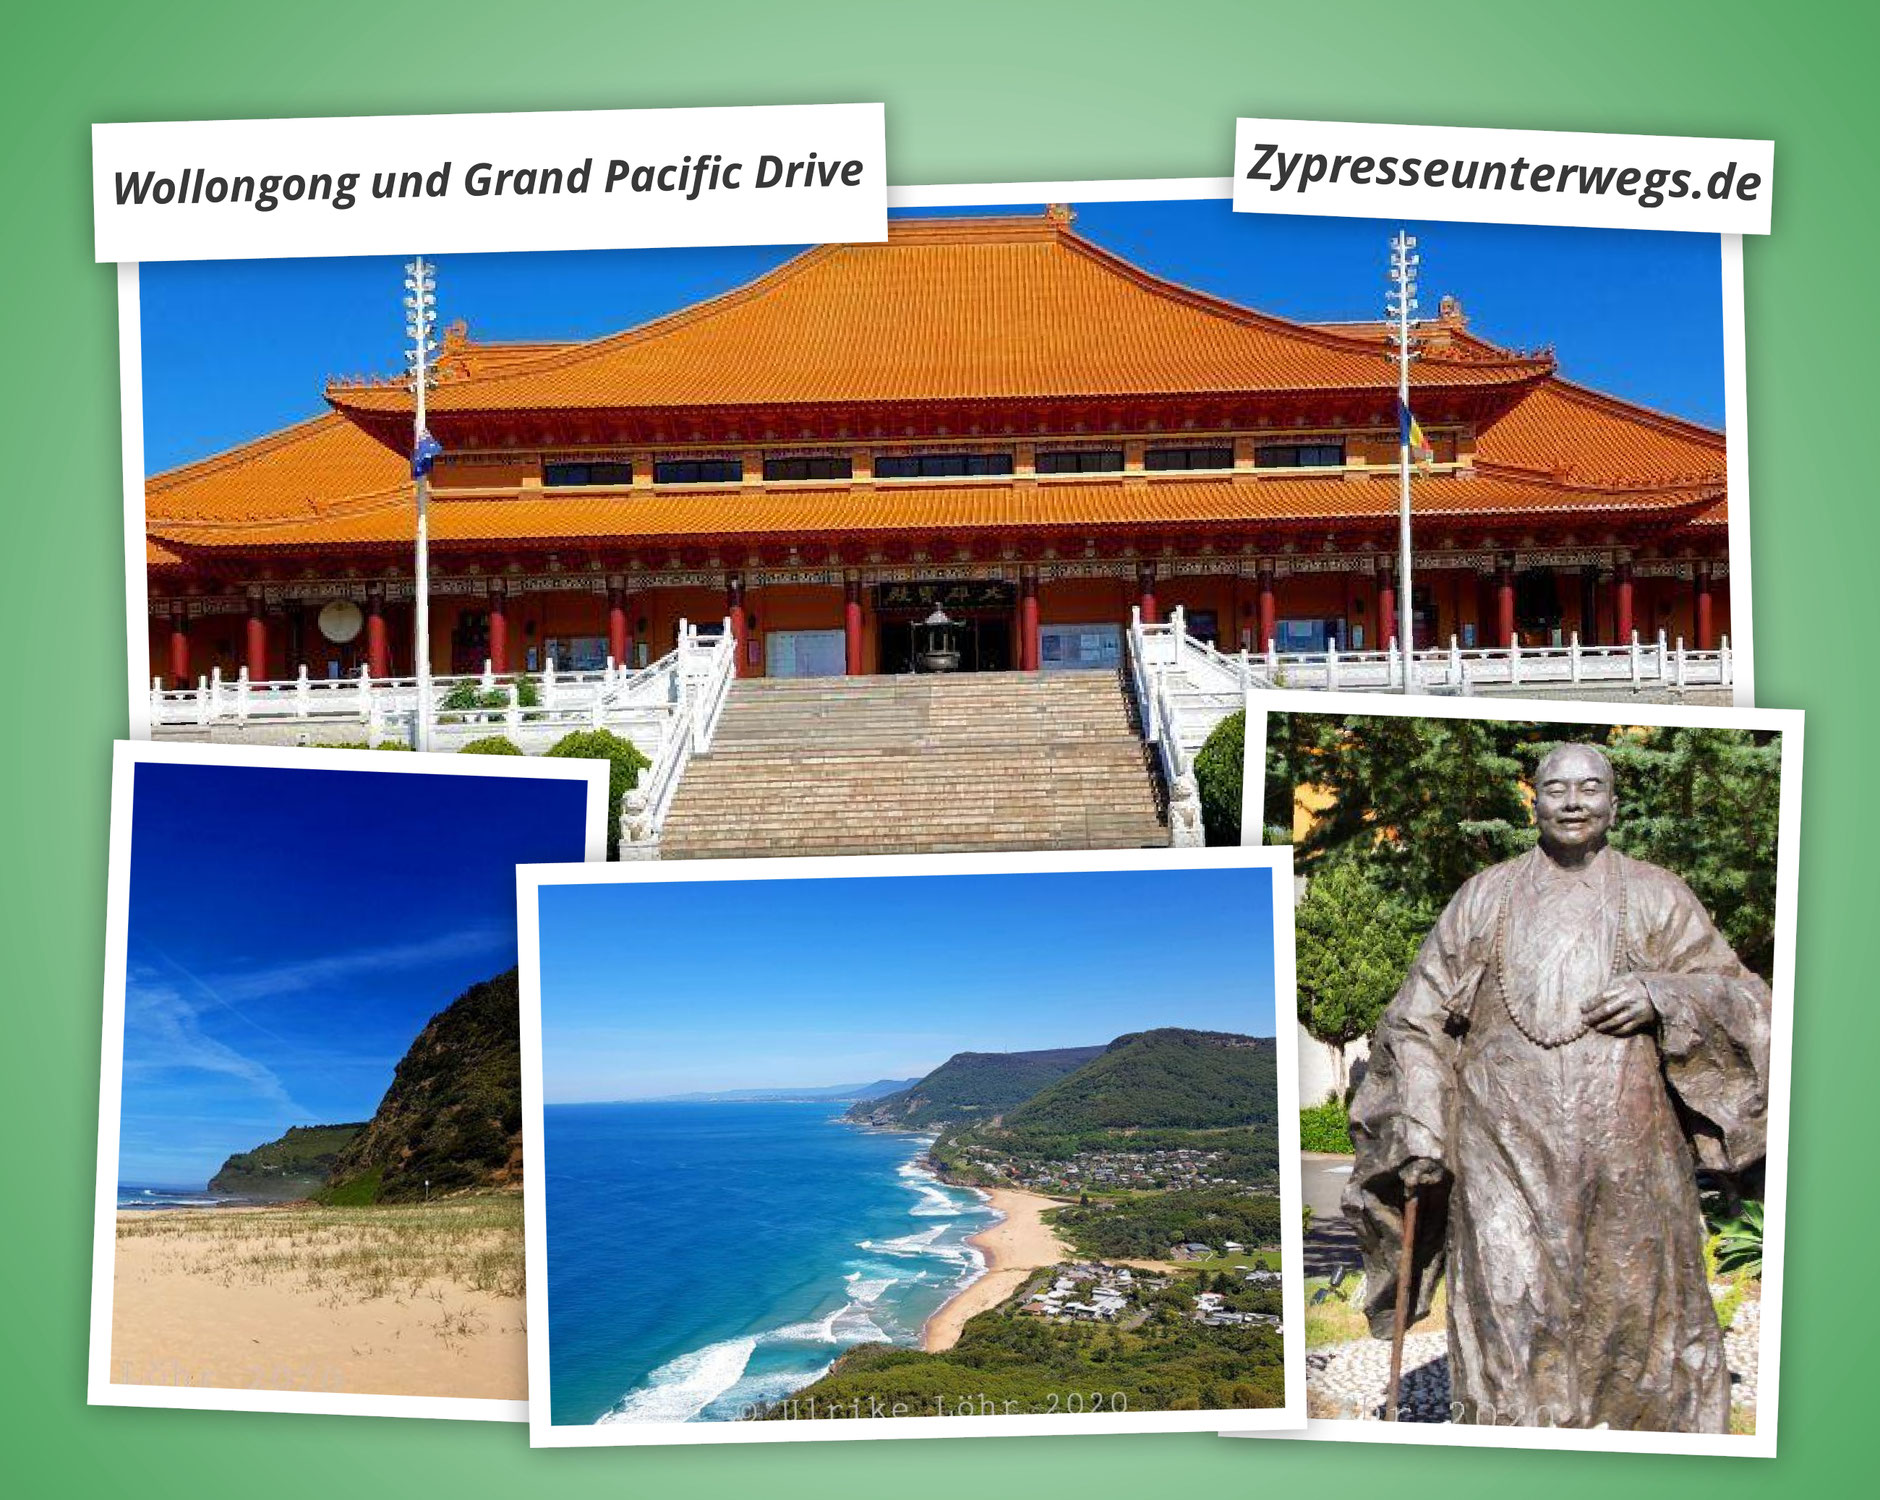 Tempel und Pazifik: Wollongong und Grand Pacific Drive